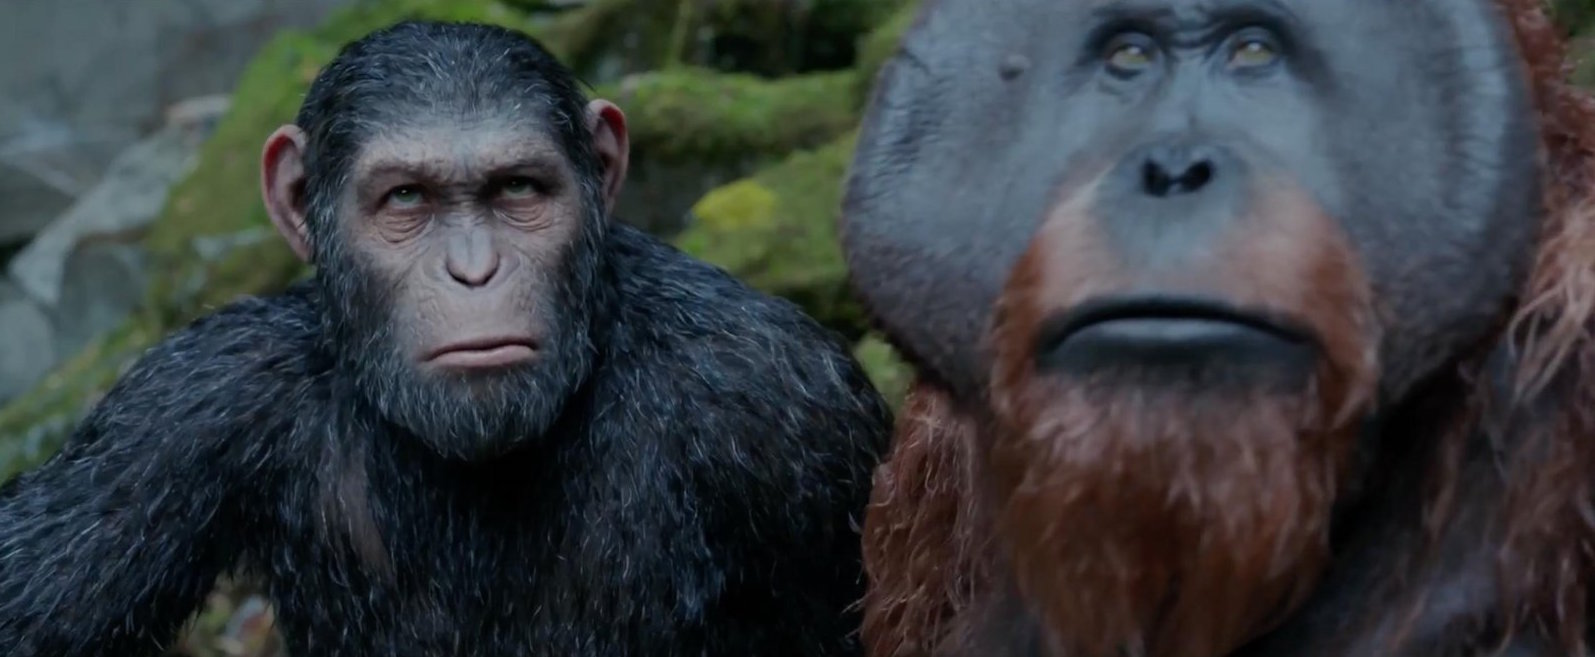 Why War For The Planet Of The Apes Ended The Way It Did (And Where It Could Go Next)